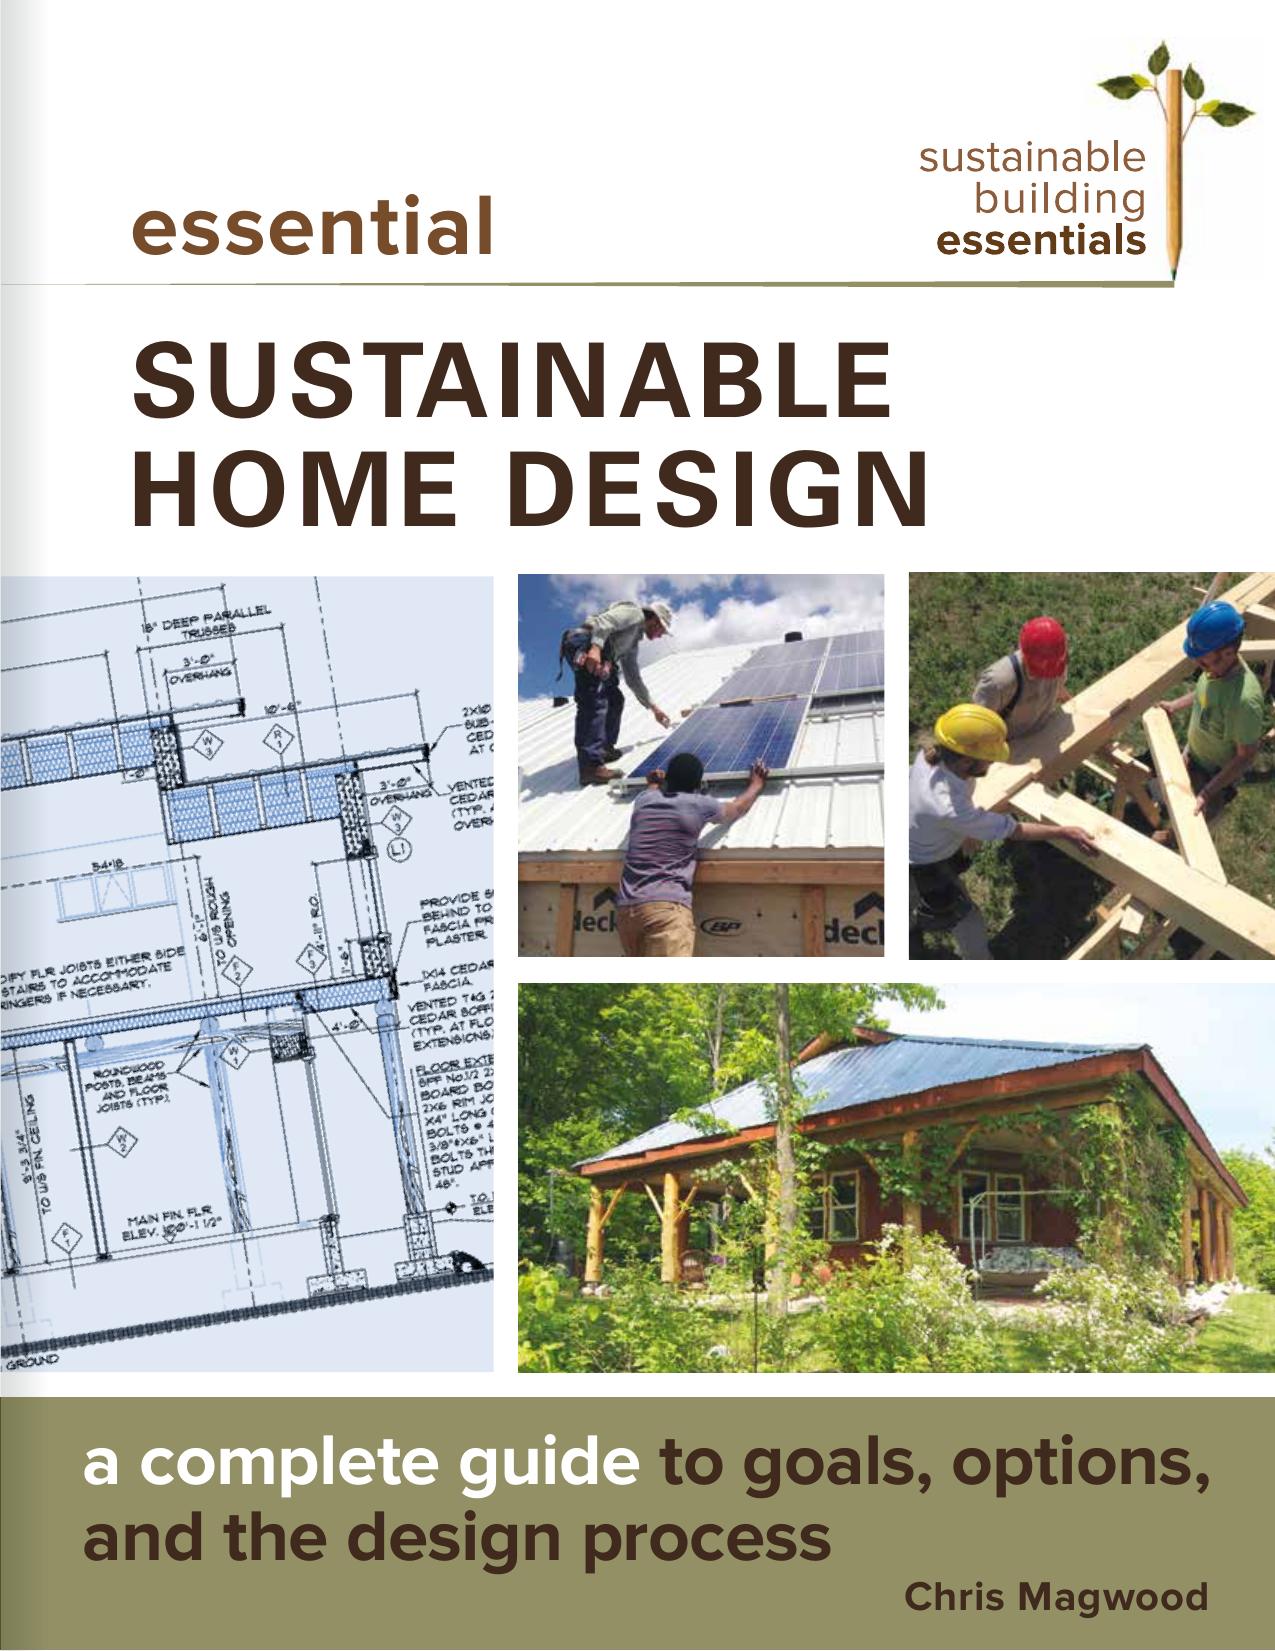 Essential Sustainable Home Design A Complete Guide to Goals, Options, and the Design Process 2017